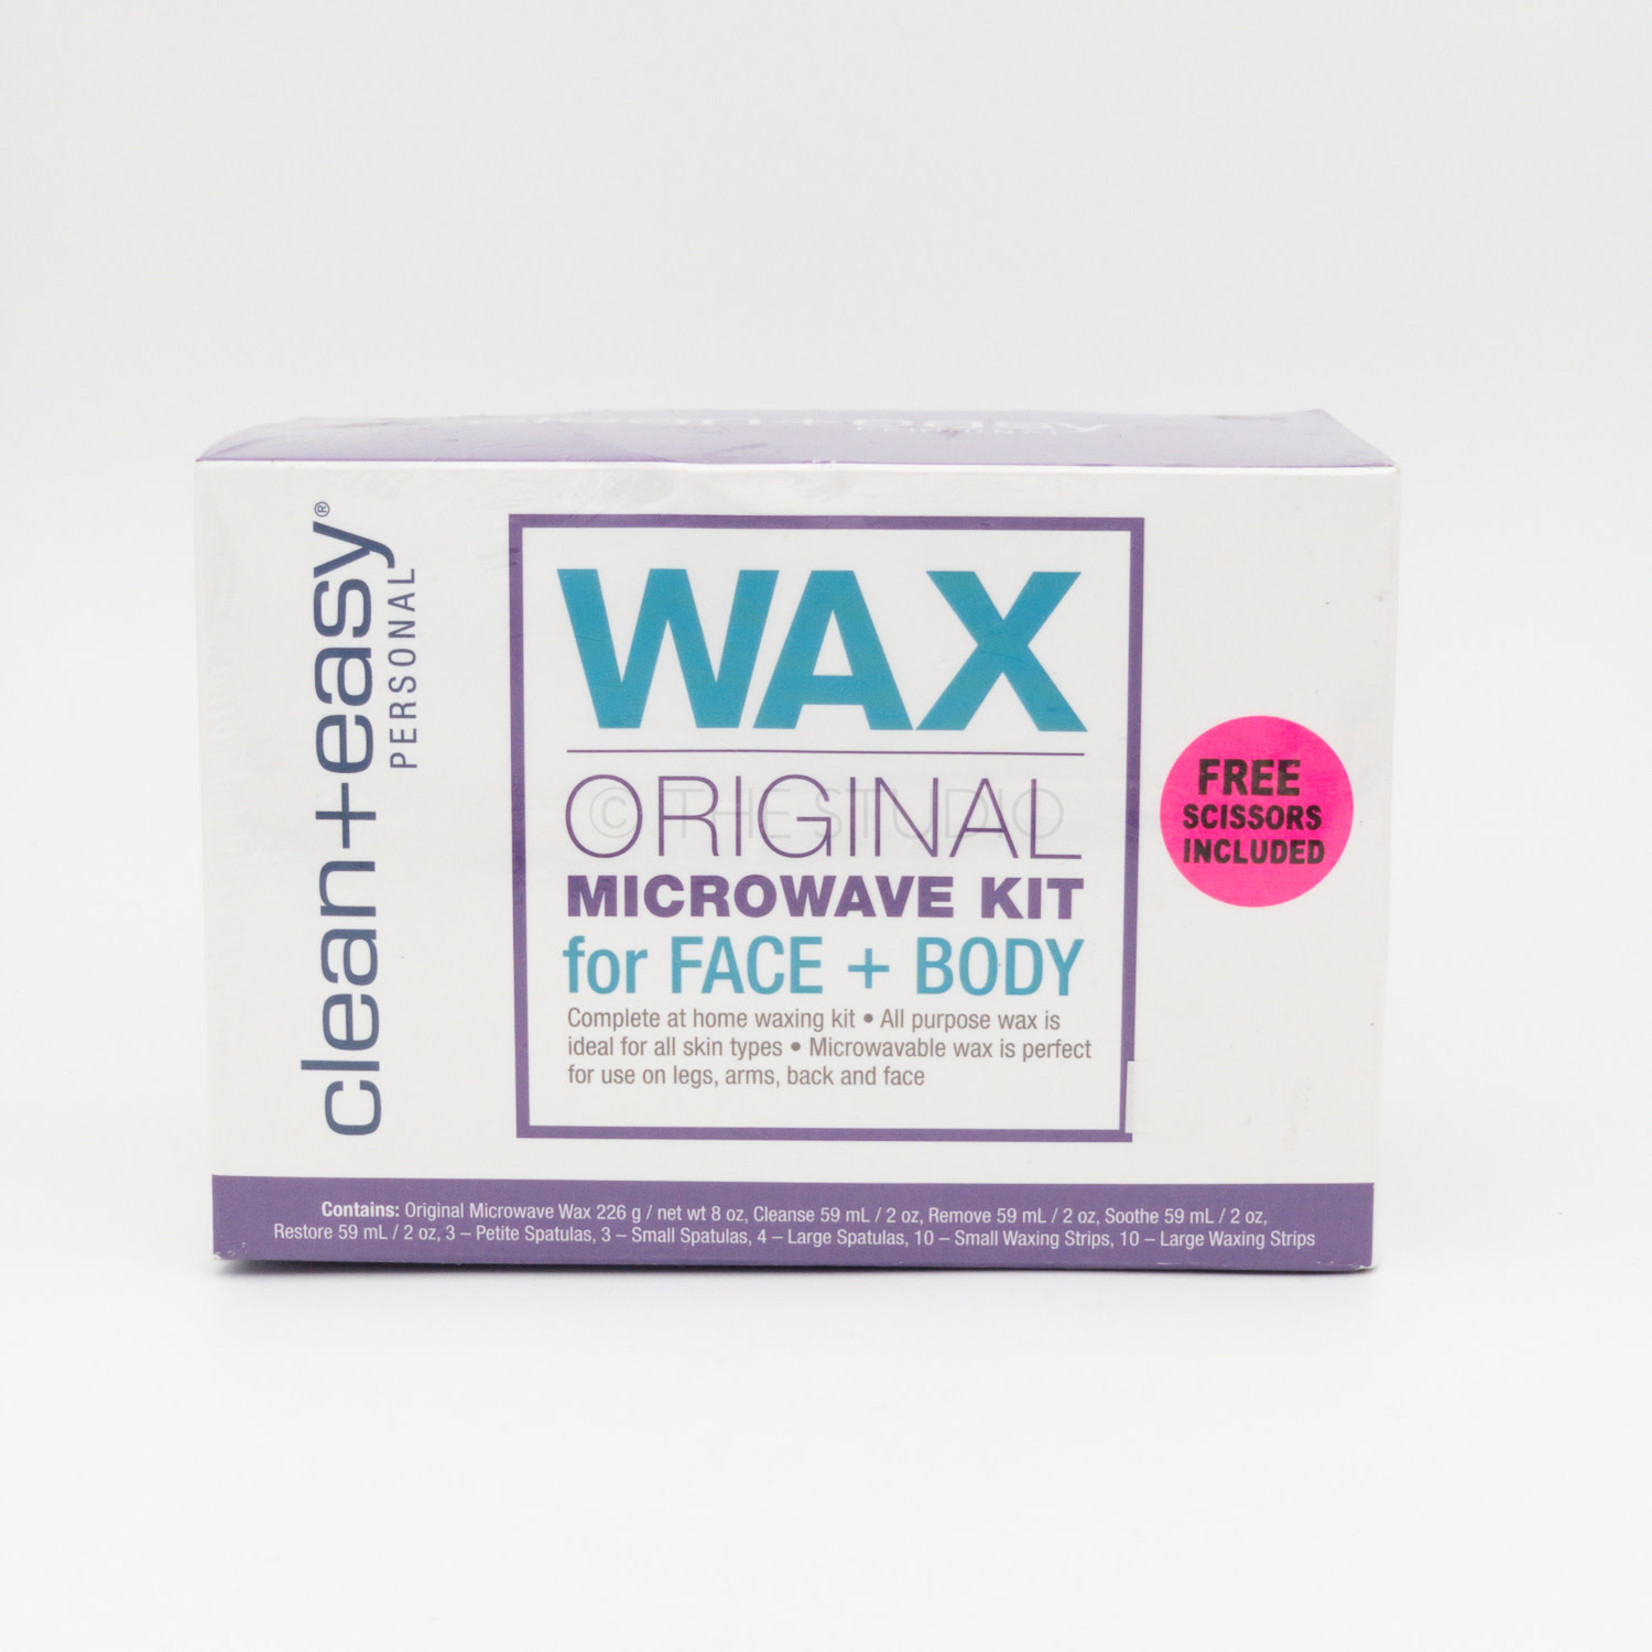 Clean + Easy Clean + Easy - Sensitive Wax Microwave Kit For Face + Body